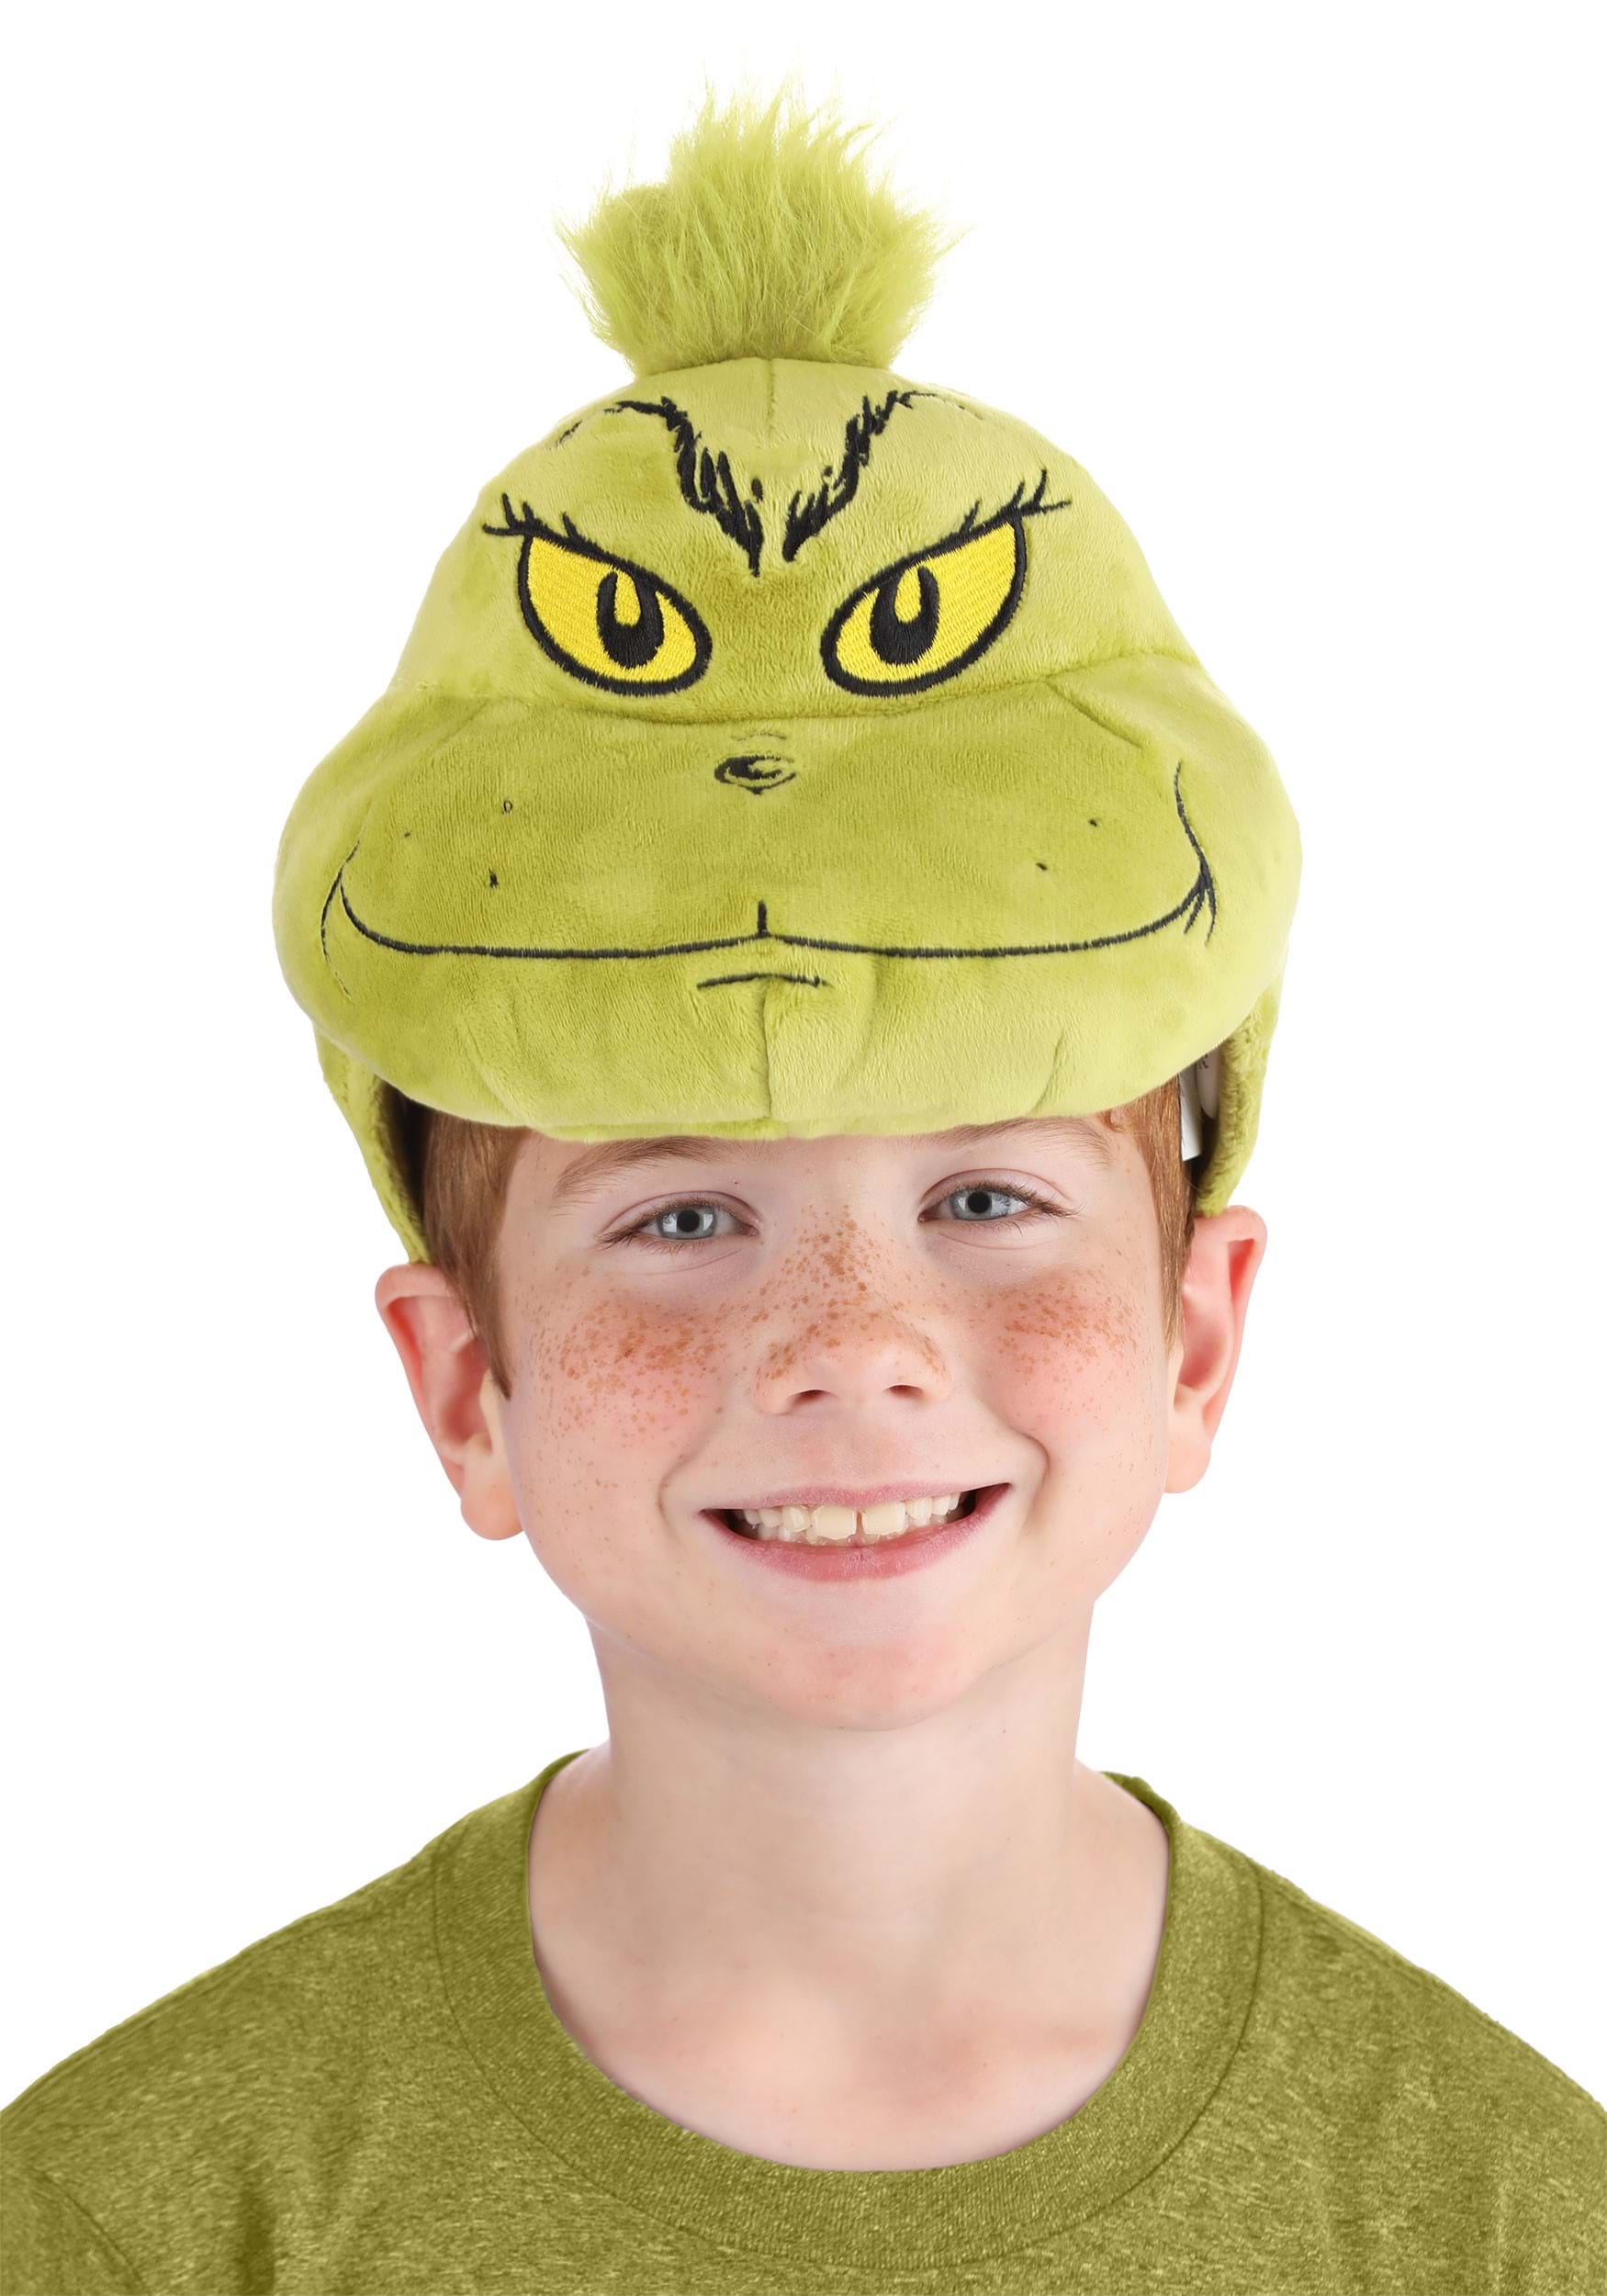 https://images.halloweencostumes.com/products/80774/2-1-295310/the-grinch-face-headband-alt-2.jpg